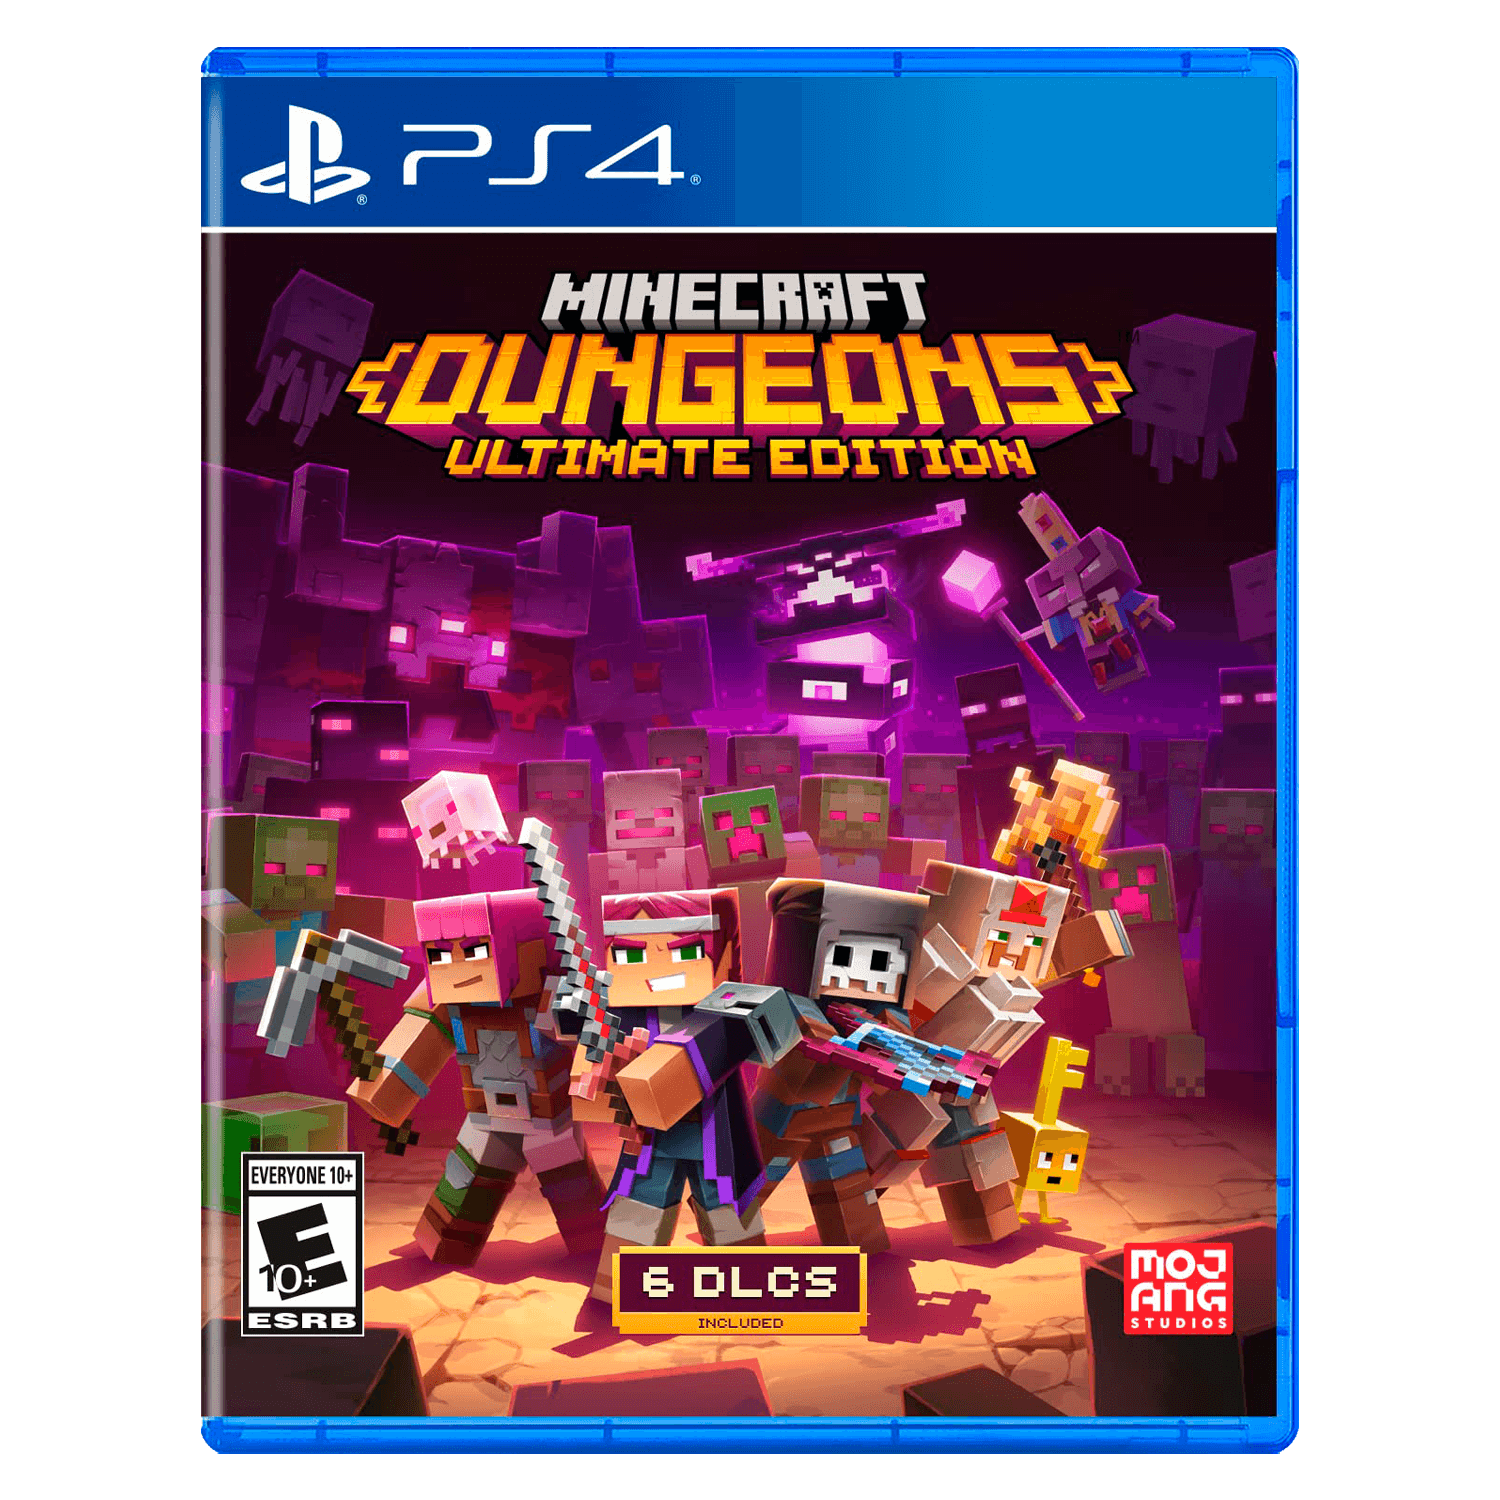 Jogo Minecraft Dungeons Ultimate Edition para PS4